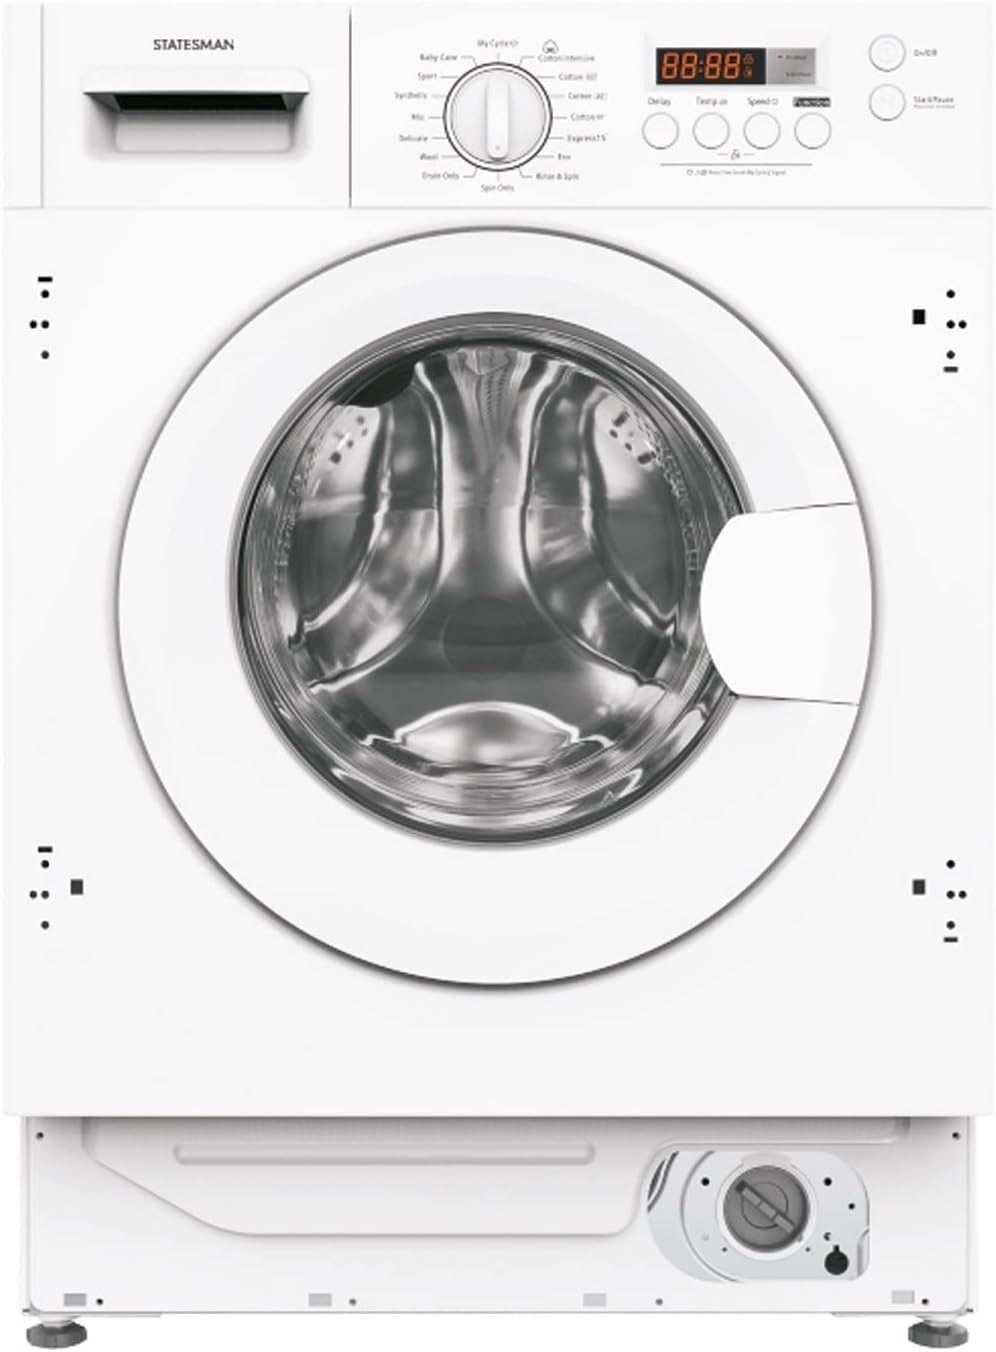 Statesman BIW0814 Integrated Washing Machine 1400rpm, 8kg Load Capacity, Front Load, 24 Hour Delay Timer, 16 Wash Programs, Pre Wash, Child Lock, White - Amazing Gadgets Outlet